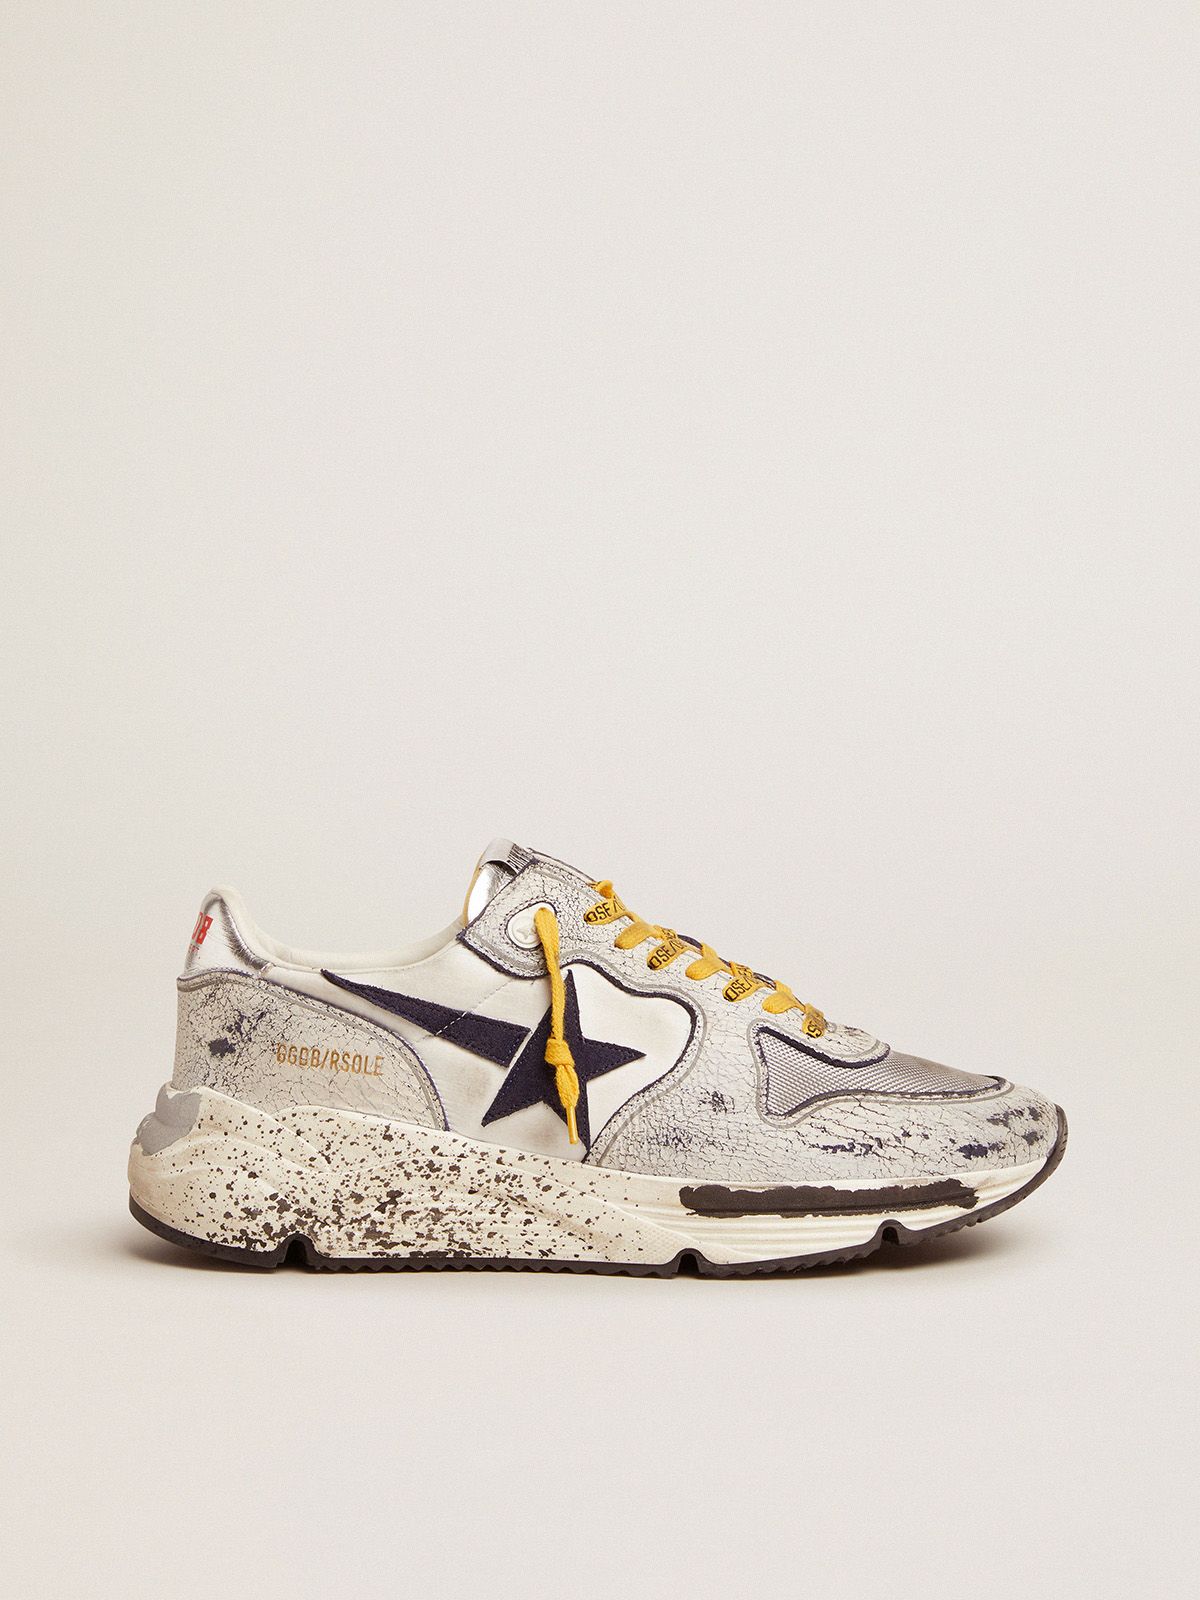 golden goose in crackle Sole Running sneakers leather white nylon with inserts